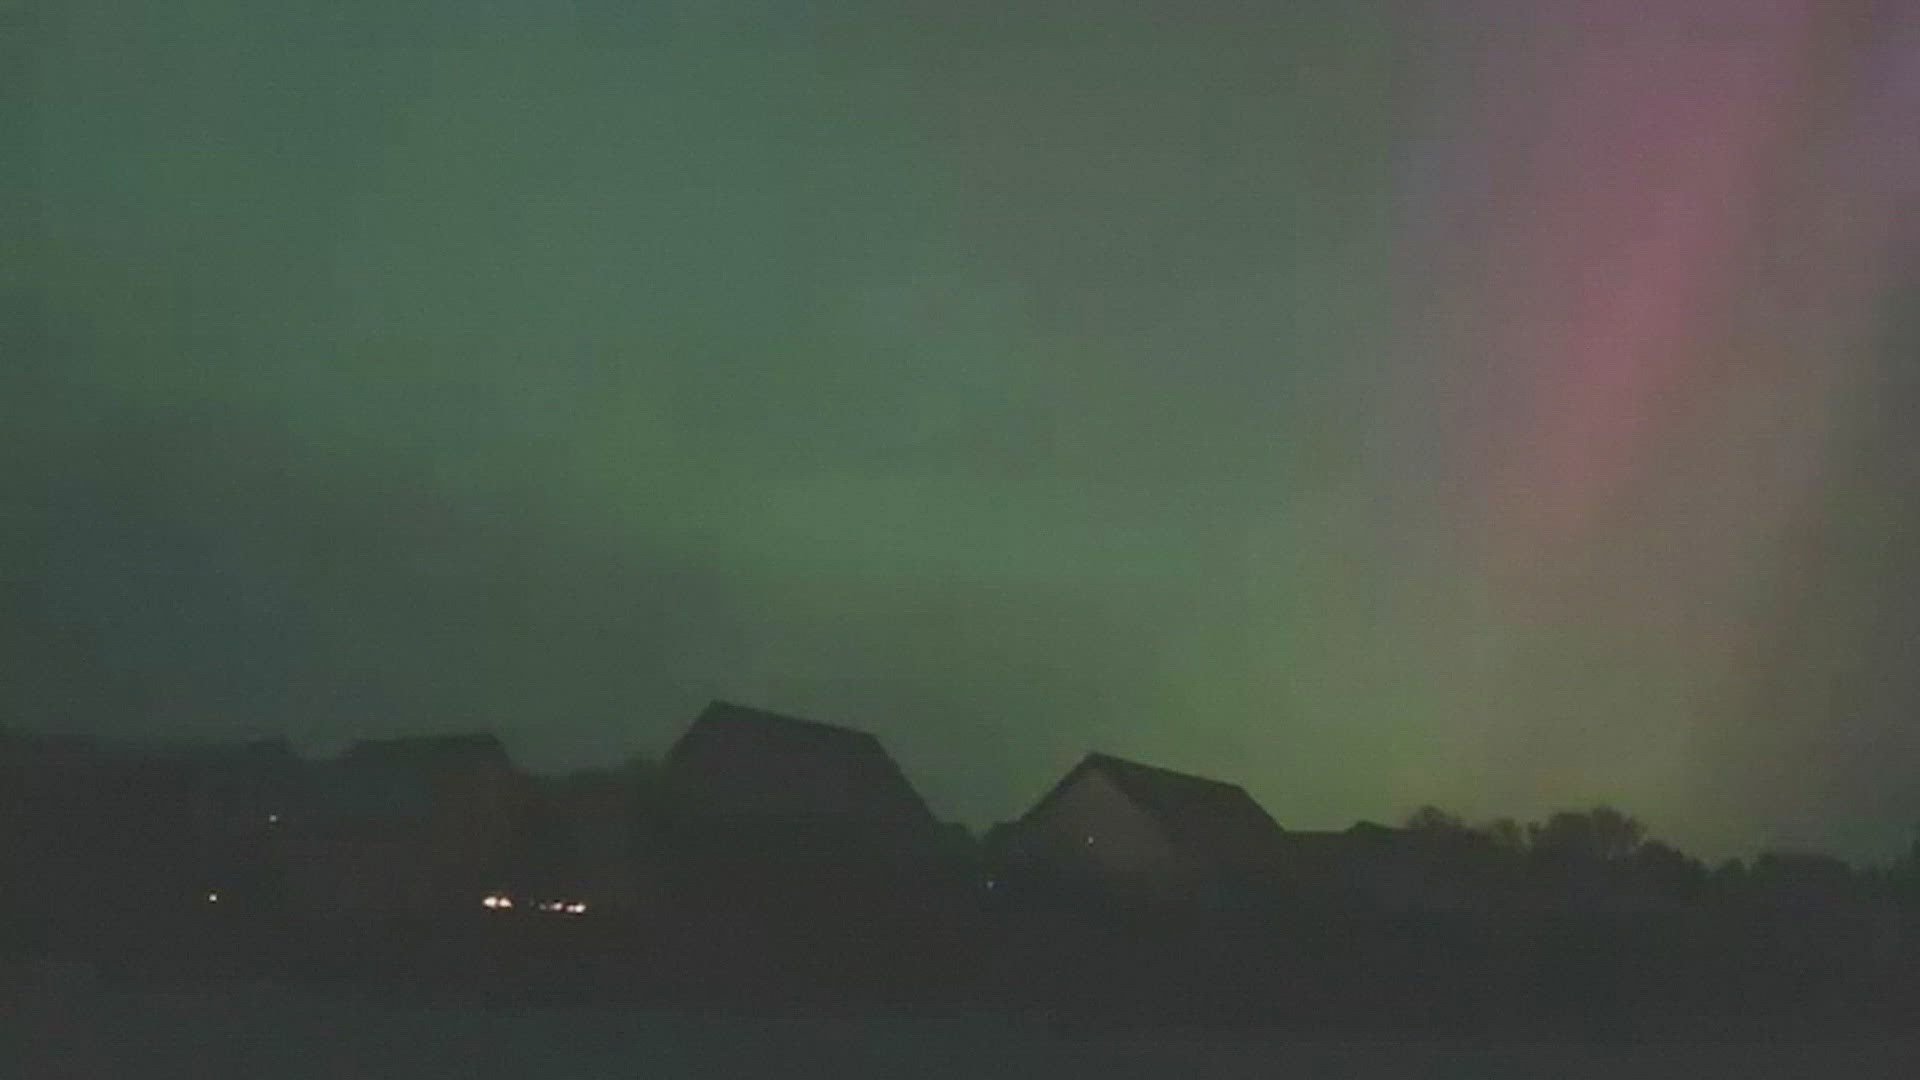 The lights are being generated by the largest geomagnetic storm Earth has seen in 20 years.